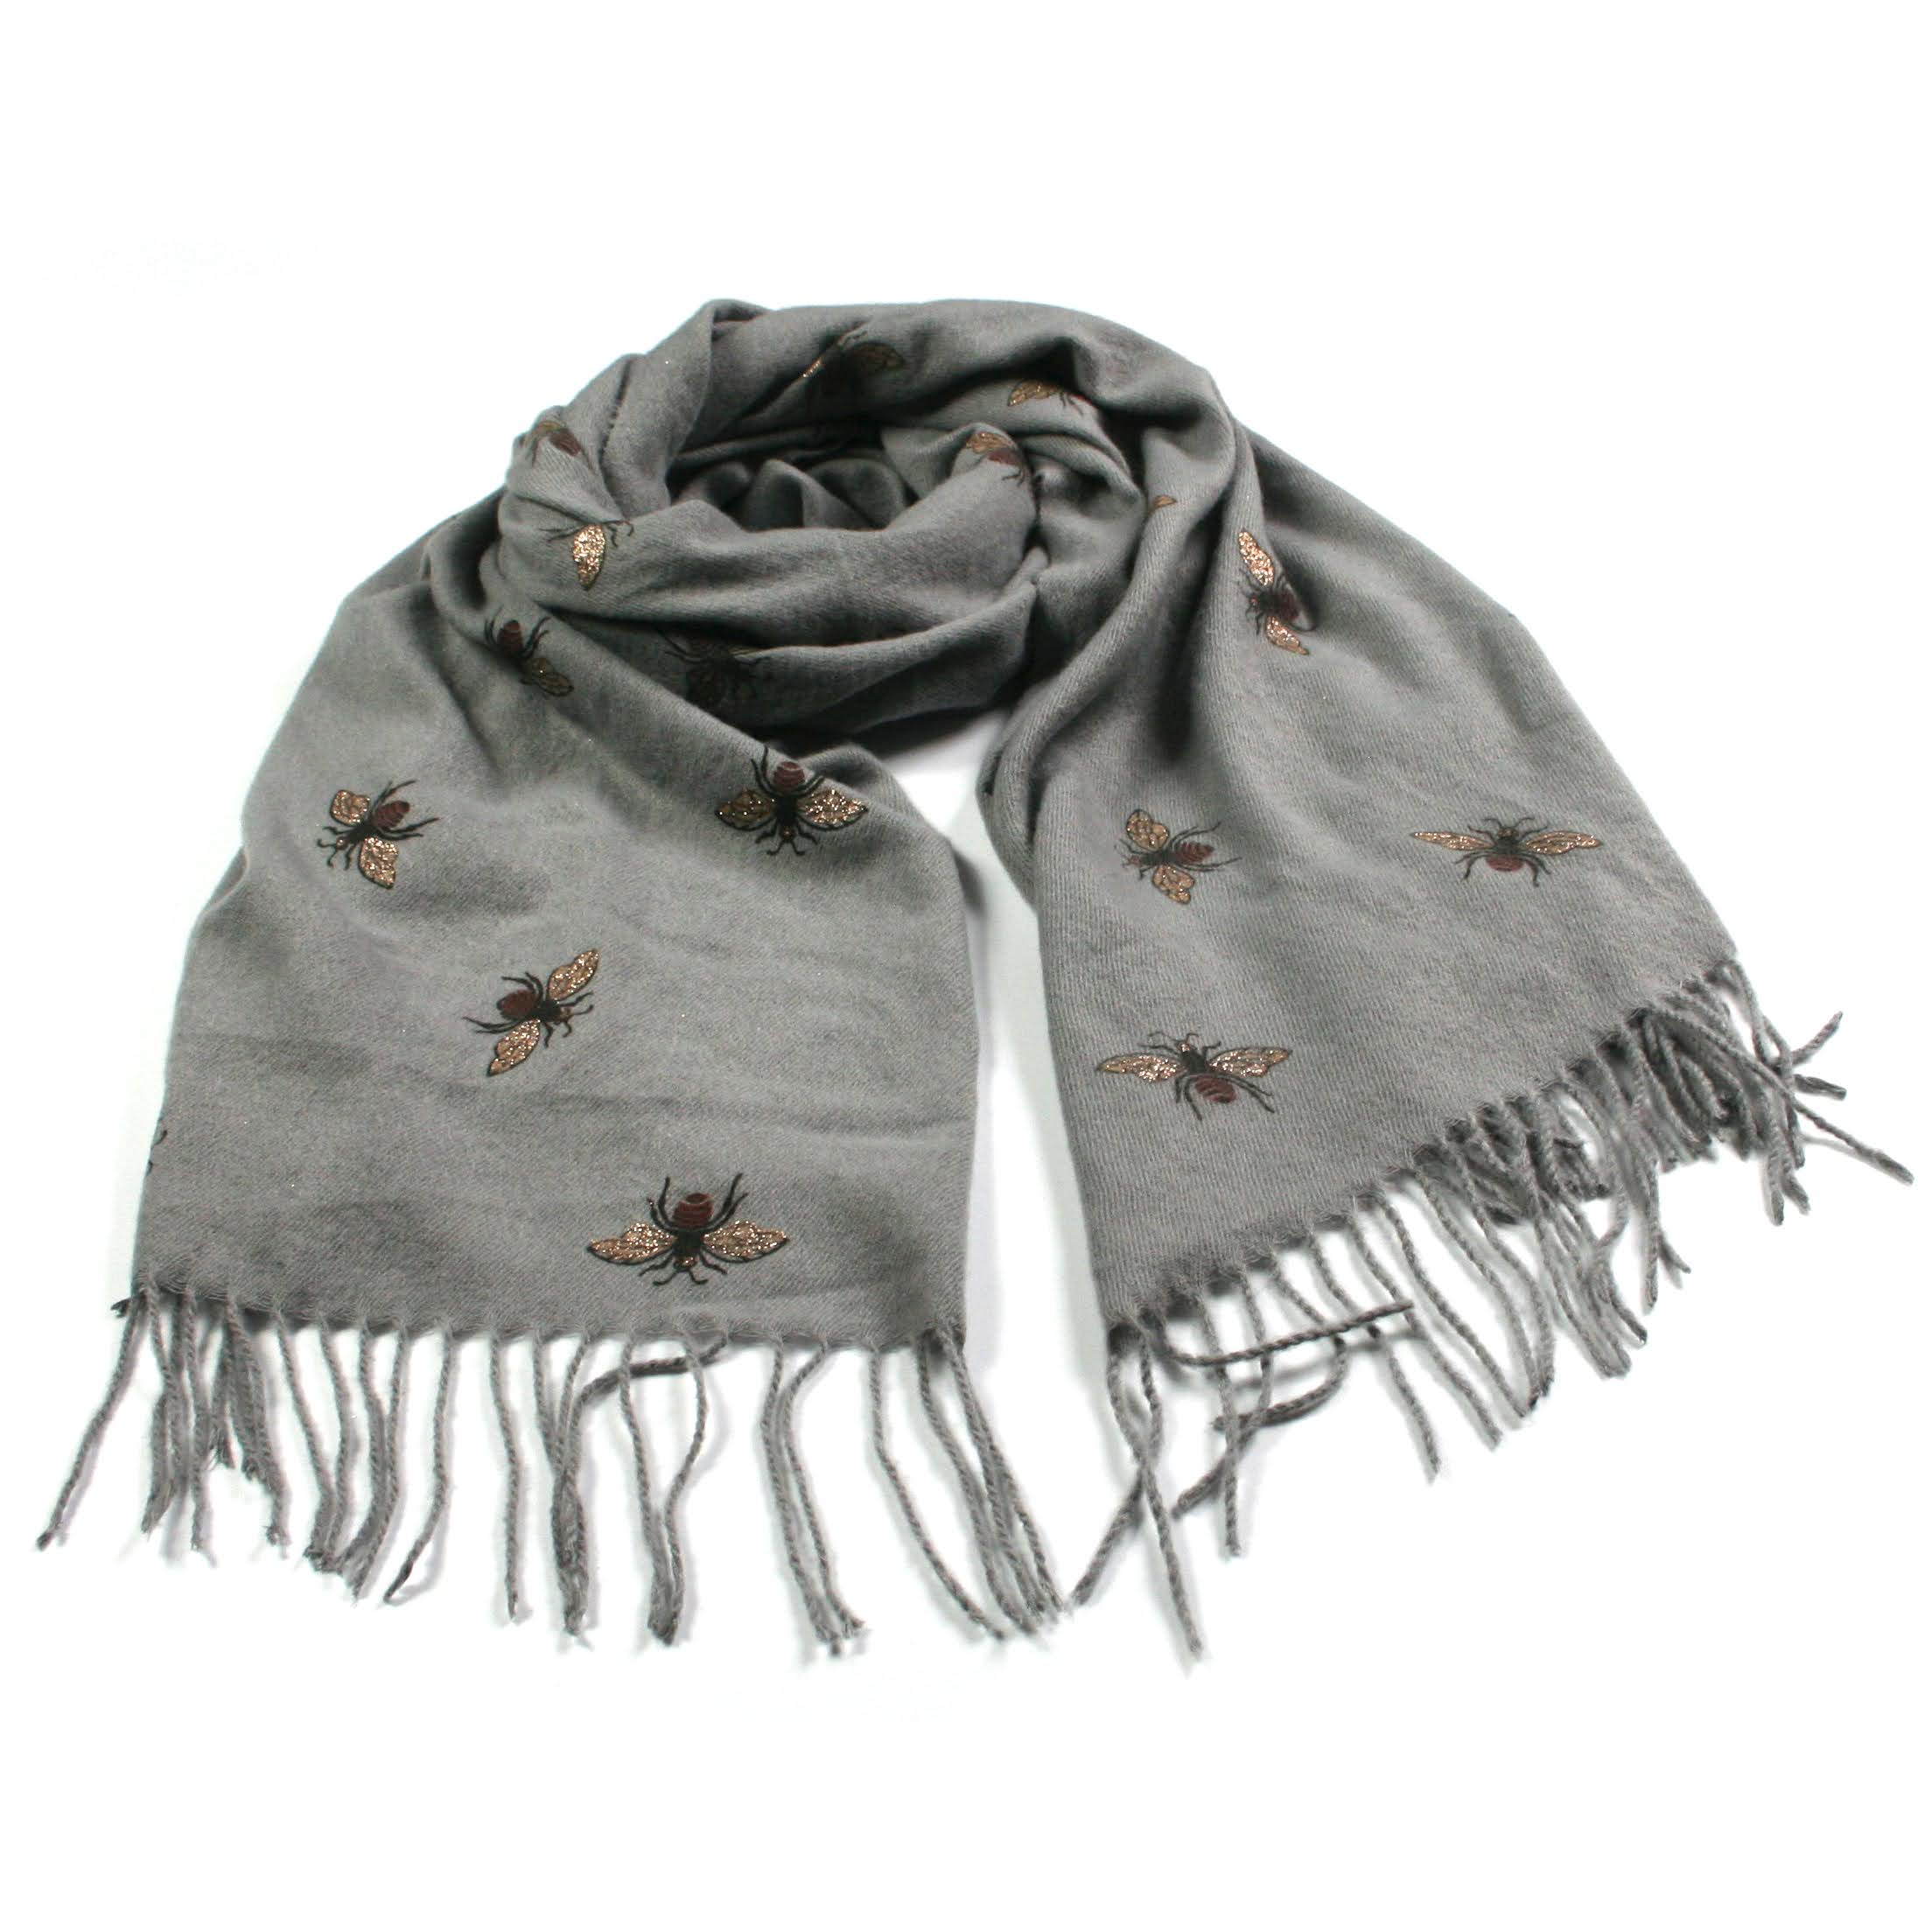 Remo - Glitter Bee Pashmina Style Scarf